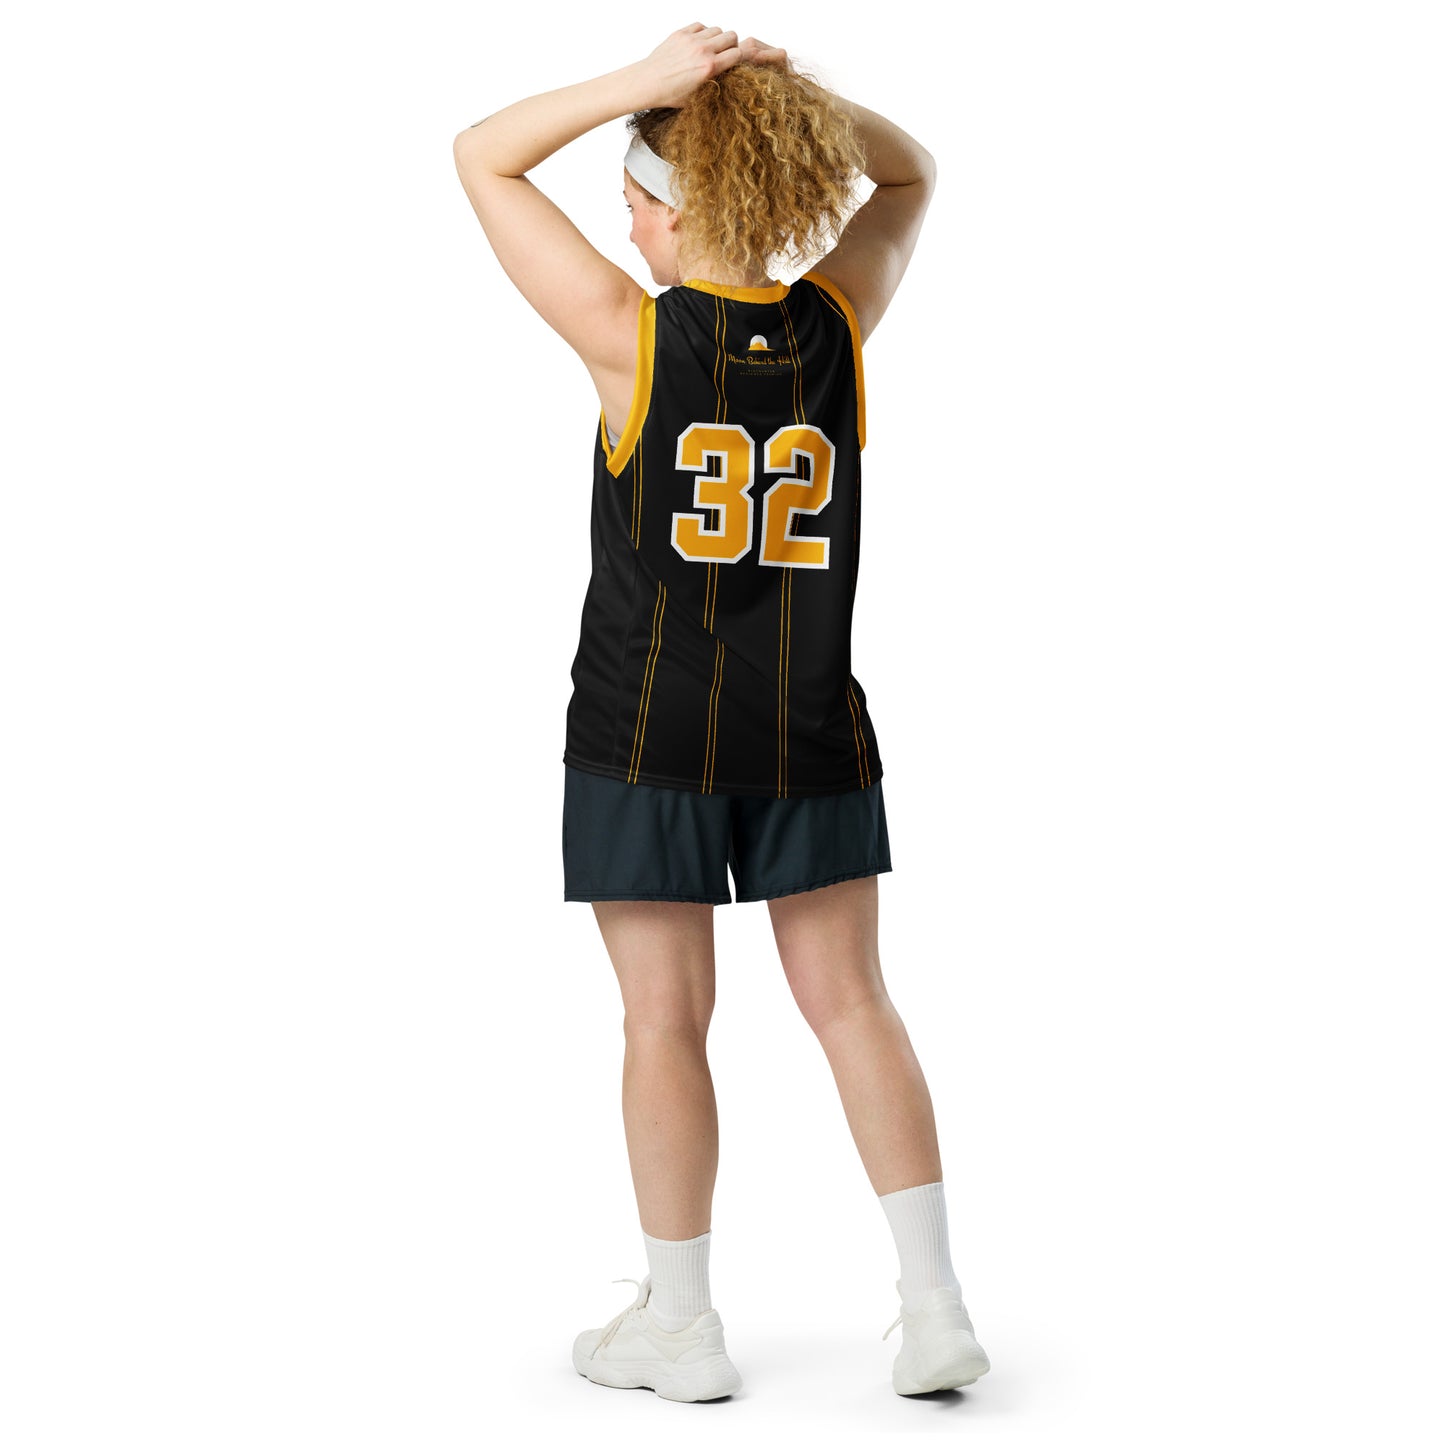 Club Amber #32 Unisex Basketball Jersey 2023 - Designed by Moon Behind The Hill Available to Buy at a Discounted Price on Moon Behind The Hill Online Designer Discount Store